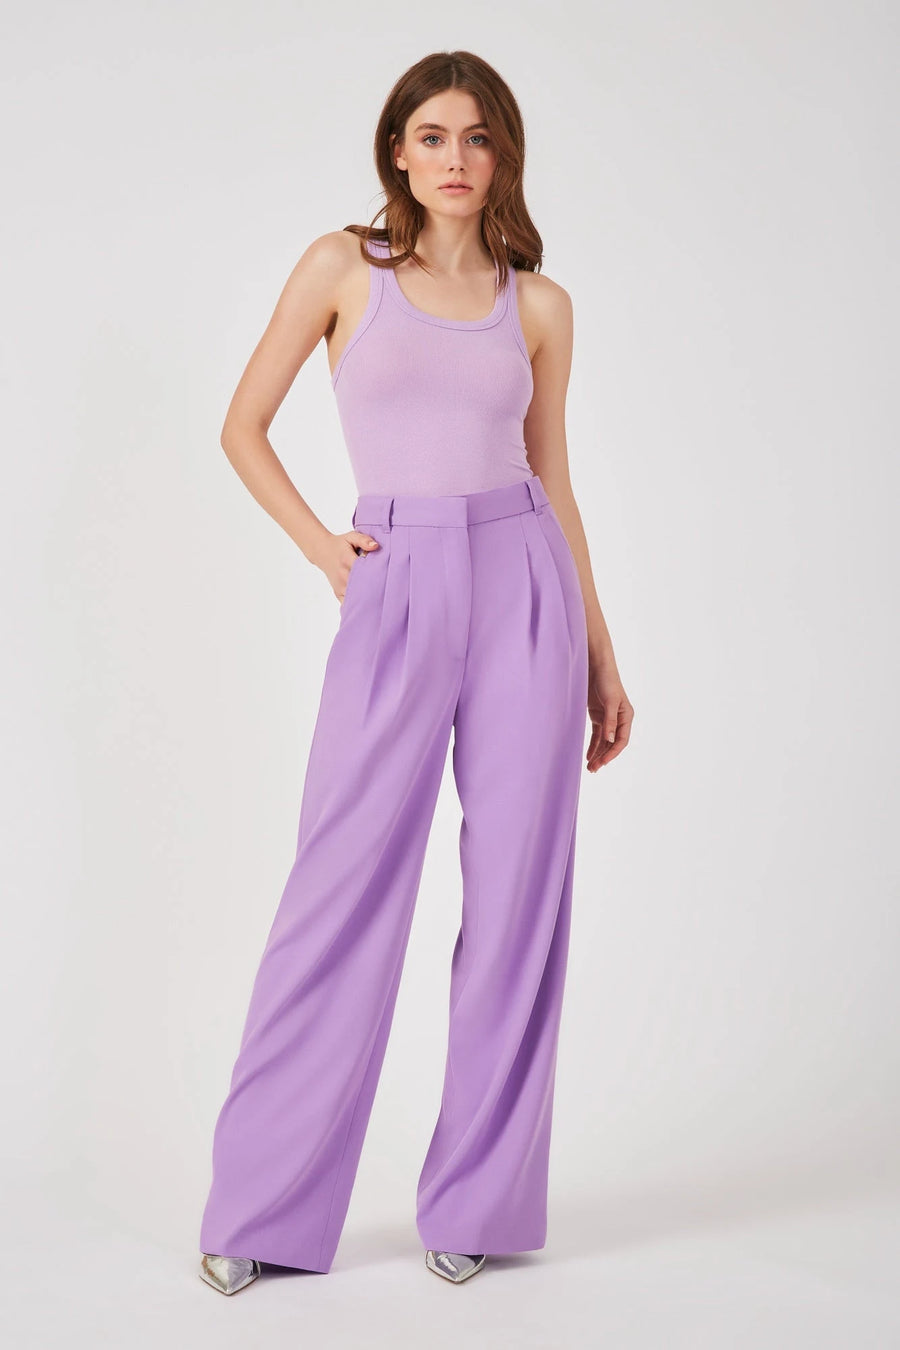 The Cameron Tank Top in radiant orchid by Greyven.